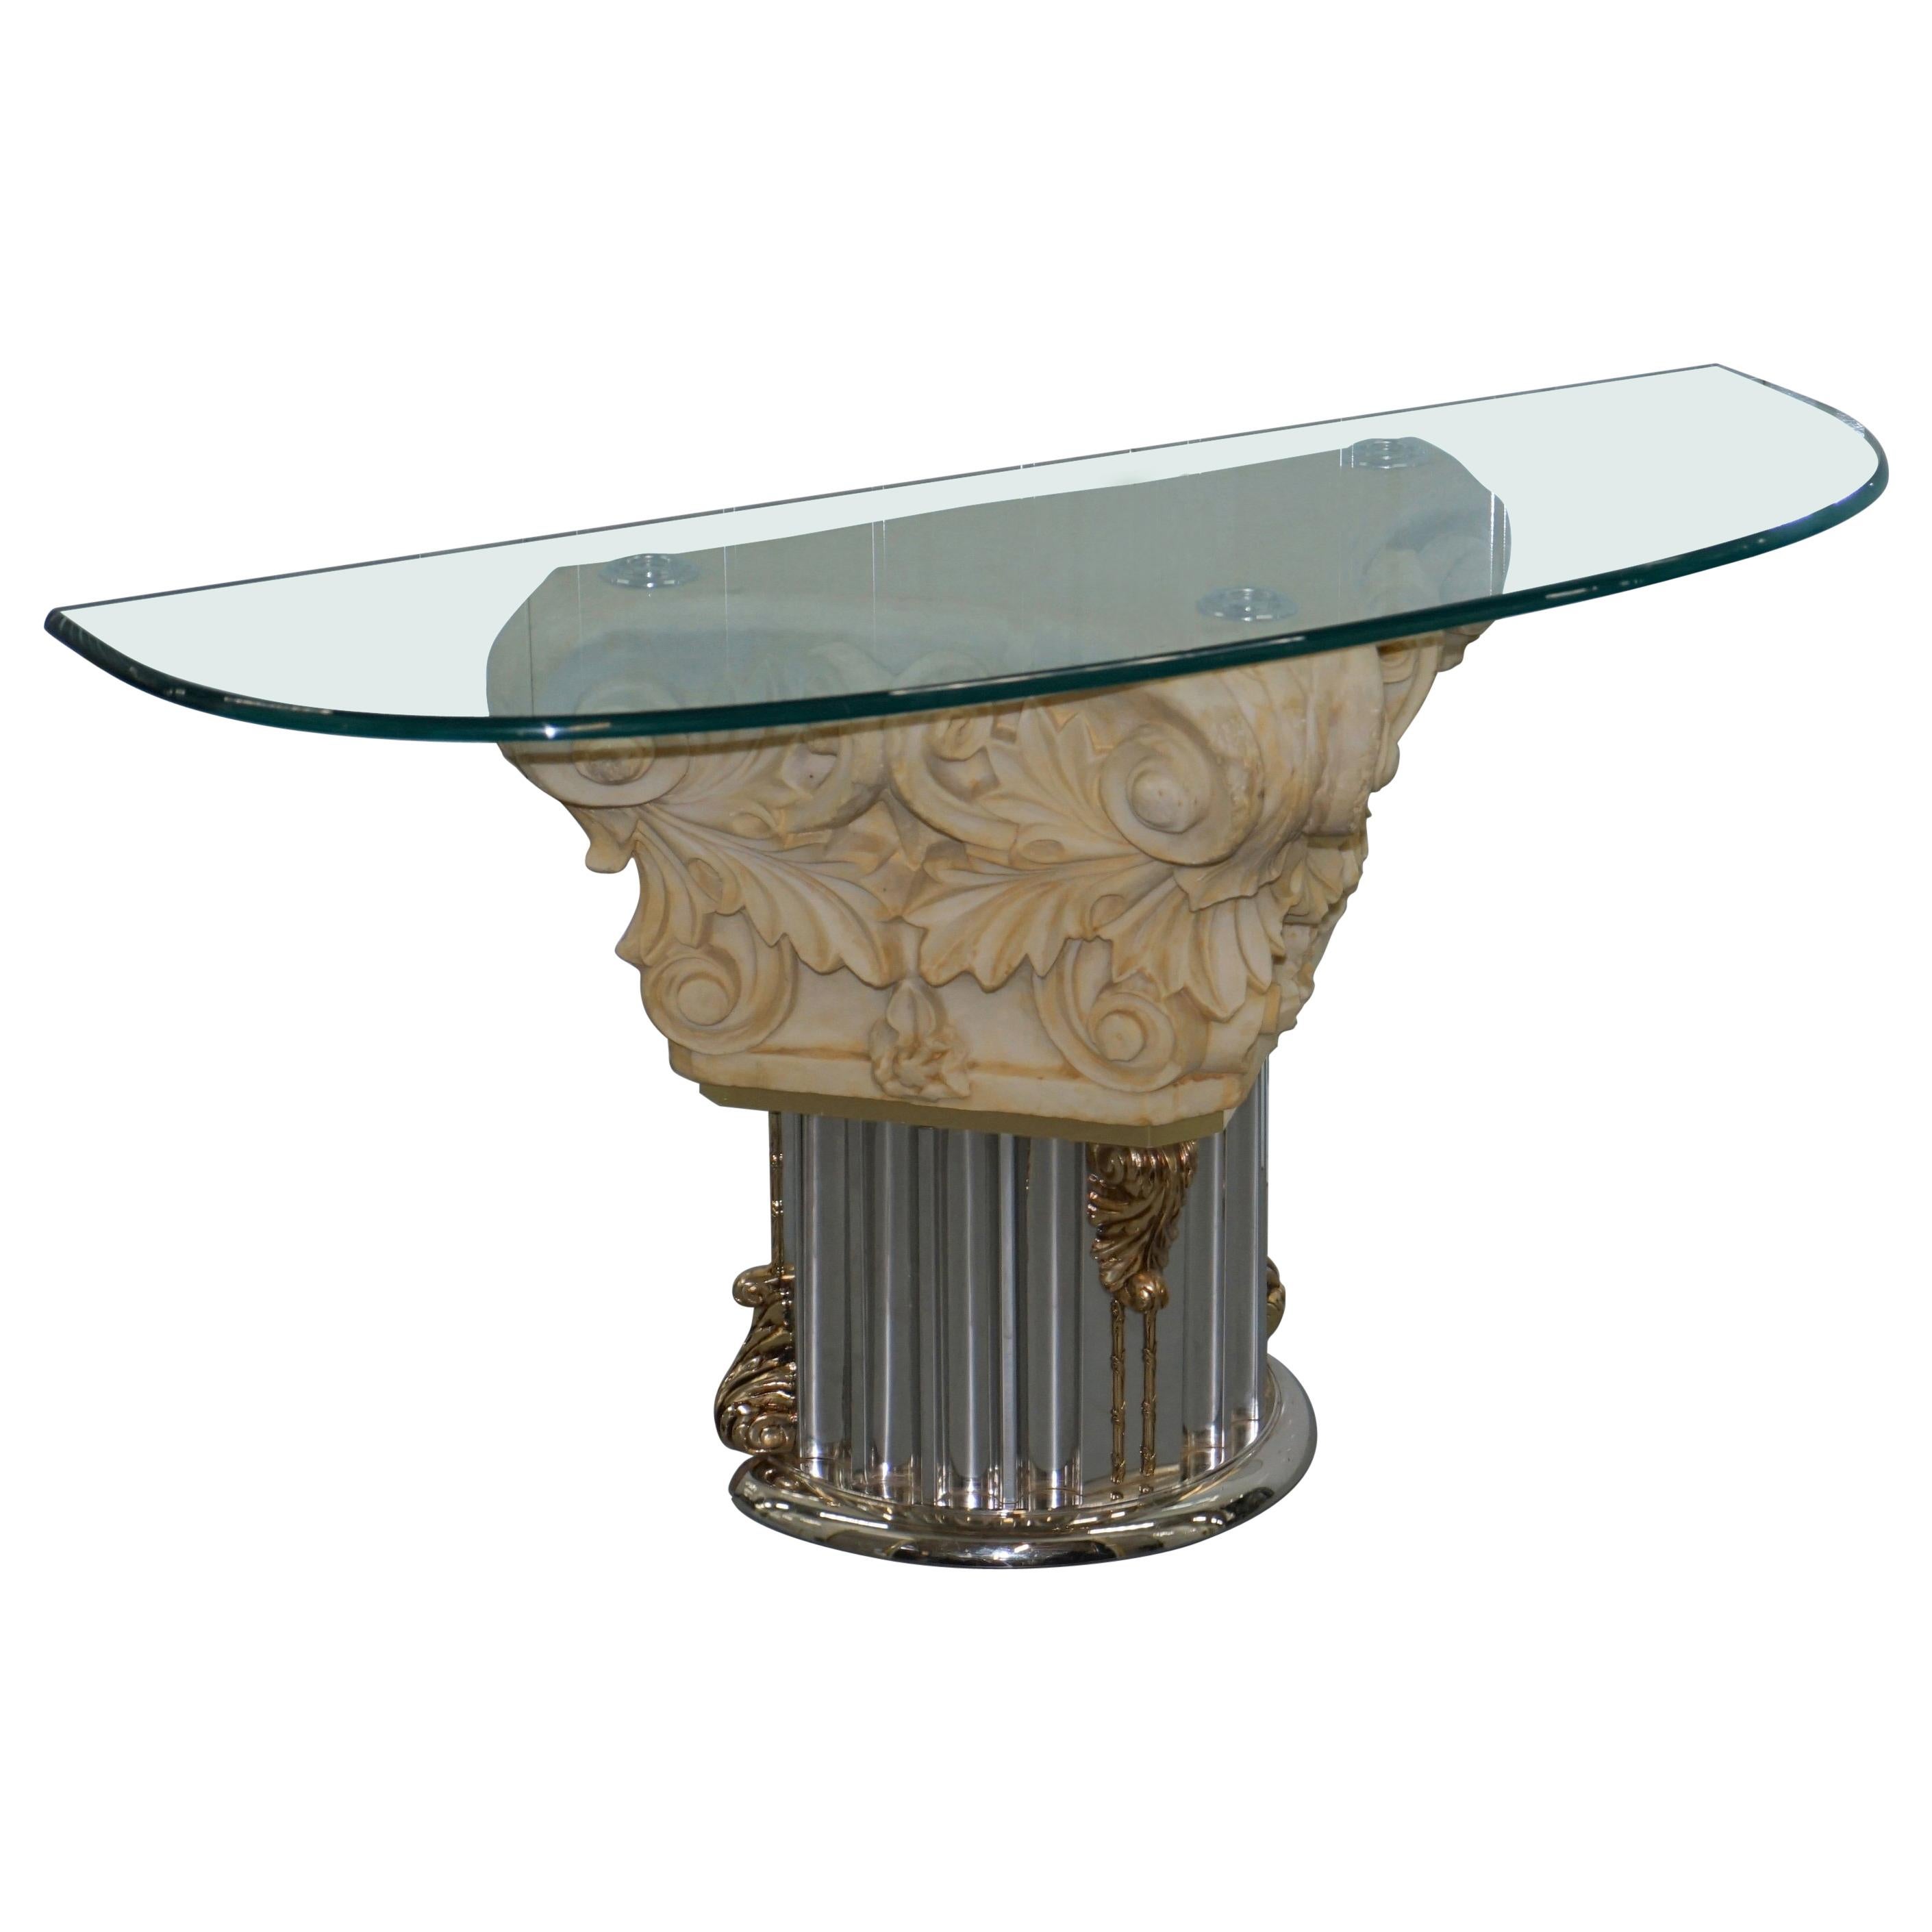 Rare Empire Classical Corinthian Pillar Console Table Base with Thick Glass Top